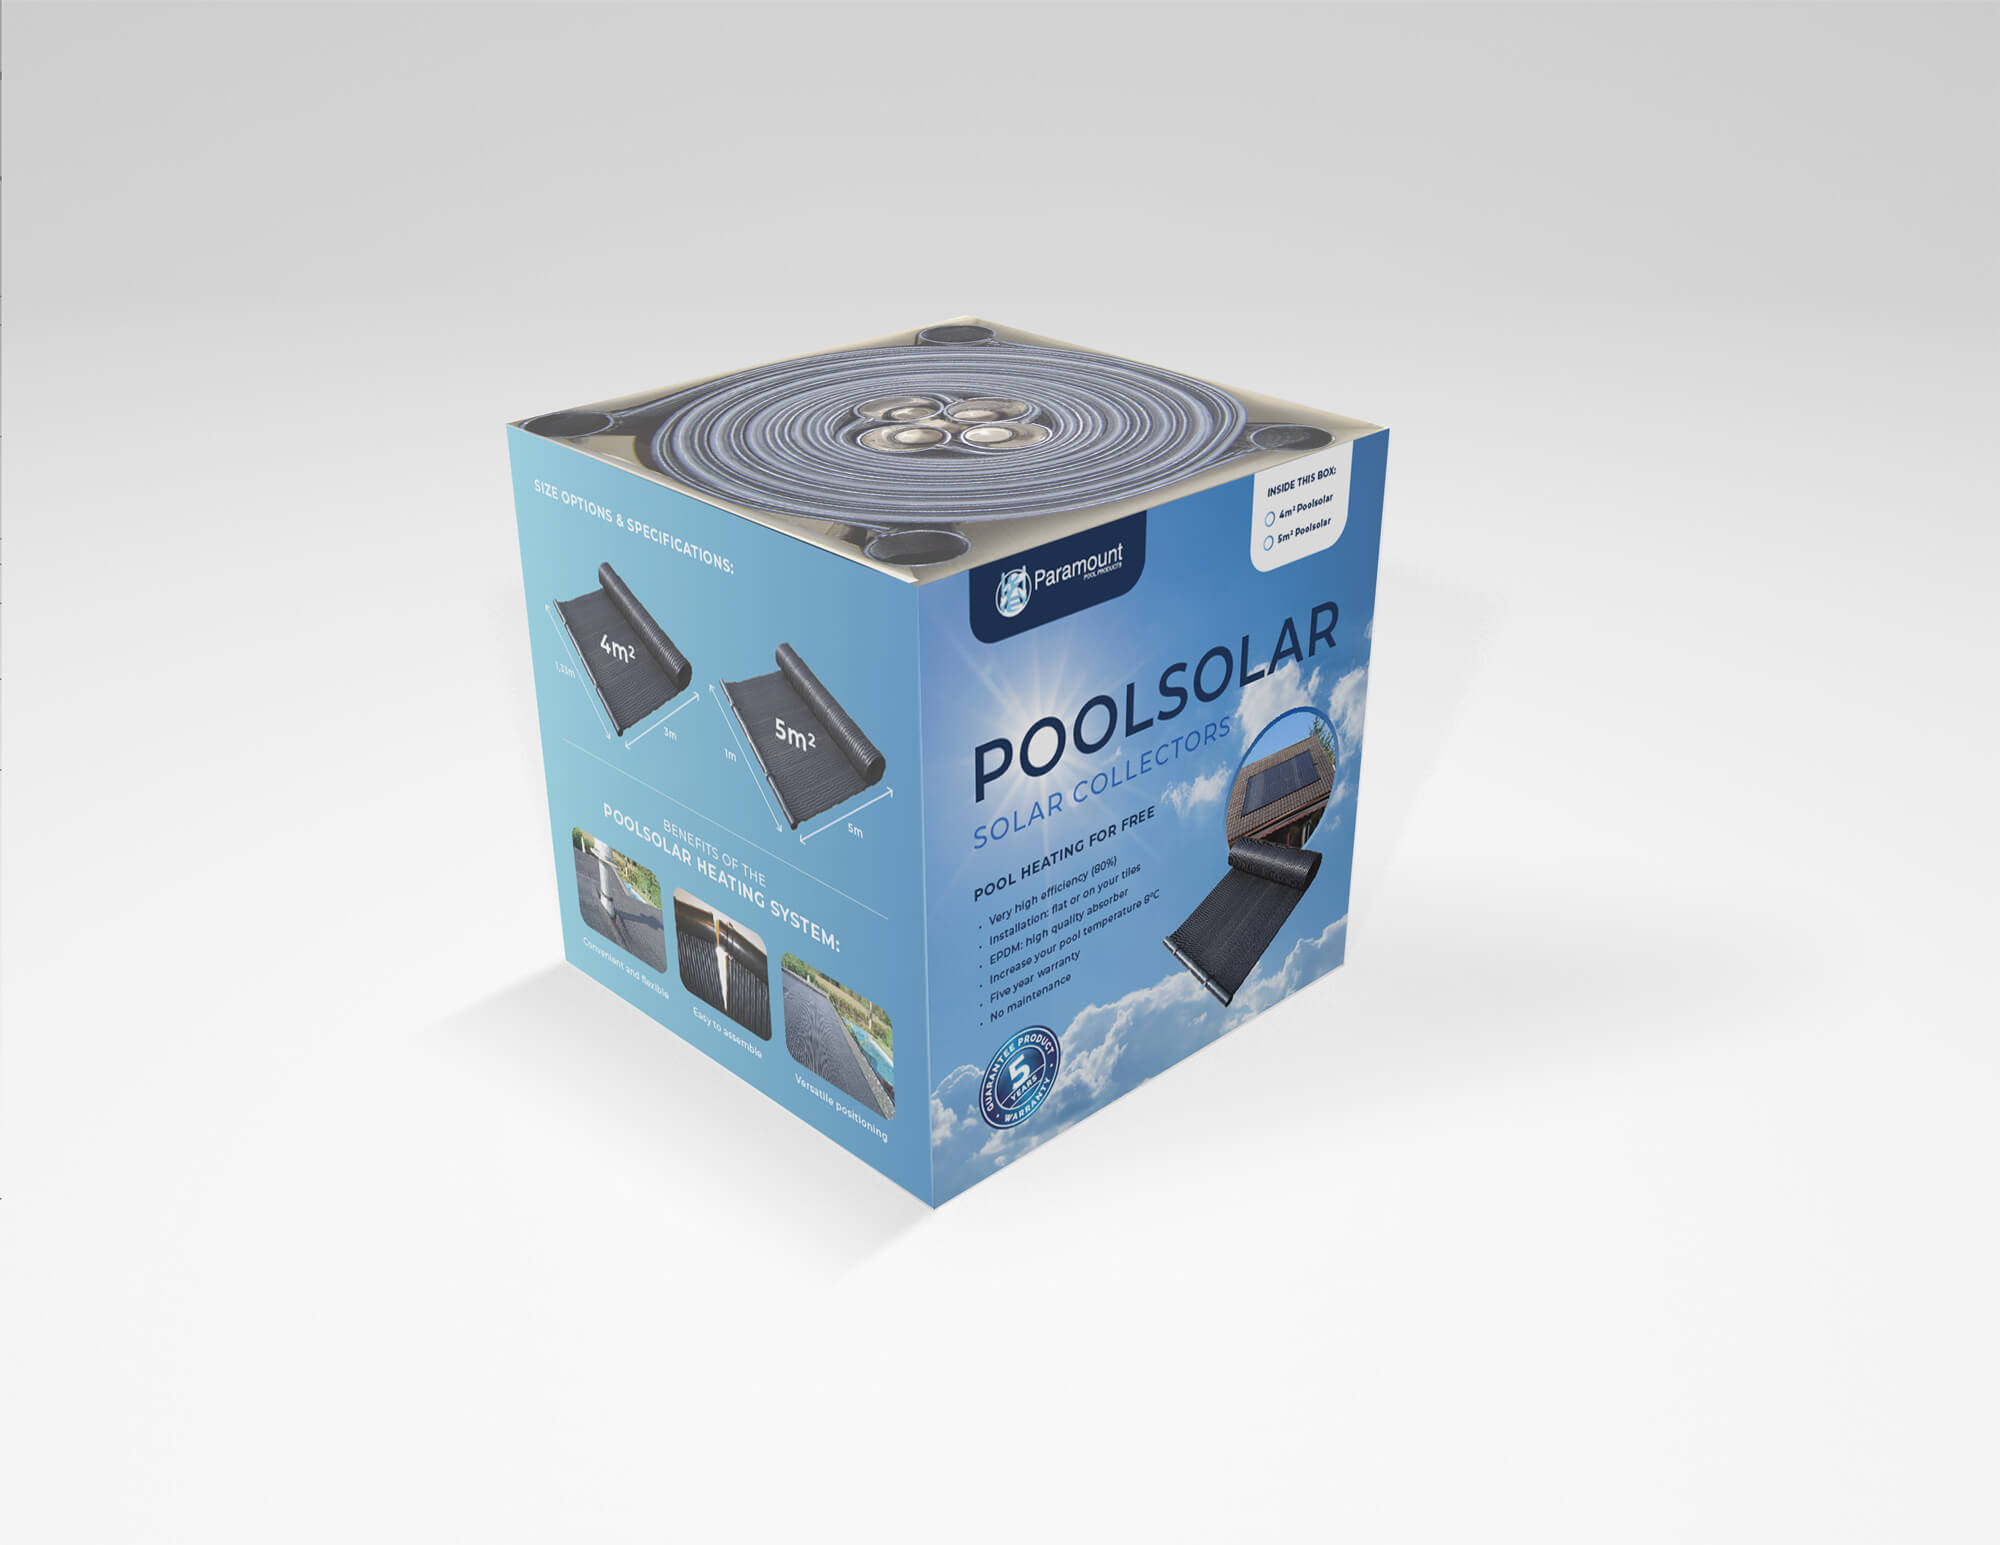 Paramount Pools Product Packaging and Adverts